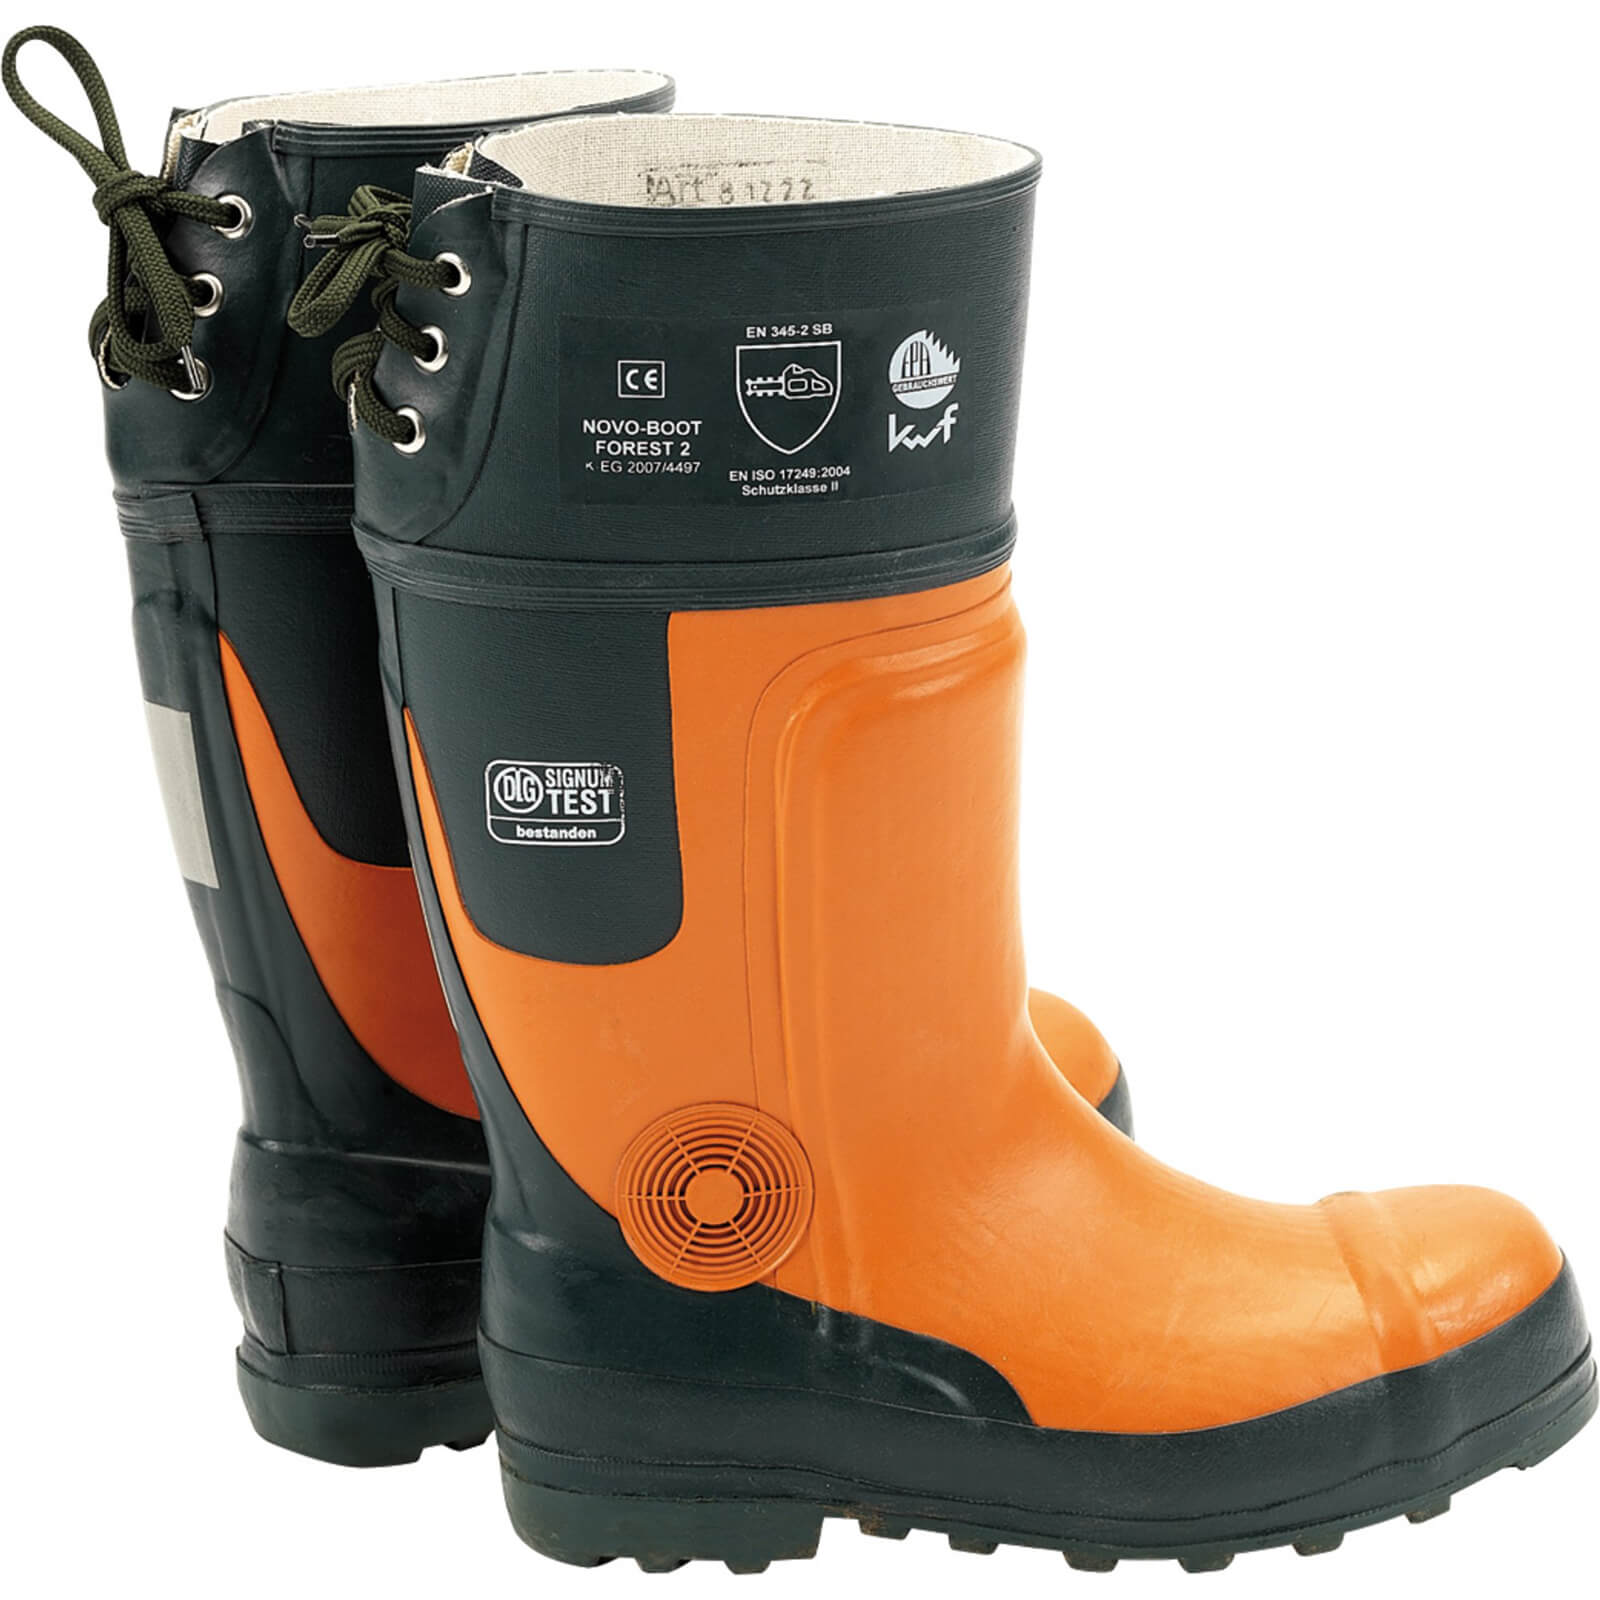 Image of Draper Expert Mens Chainsaw Safety Boots Black / Orange Size 9